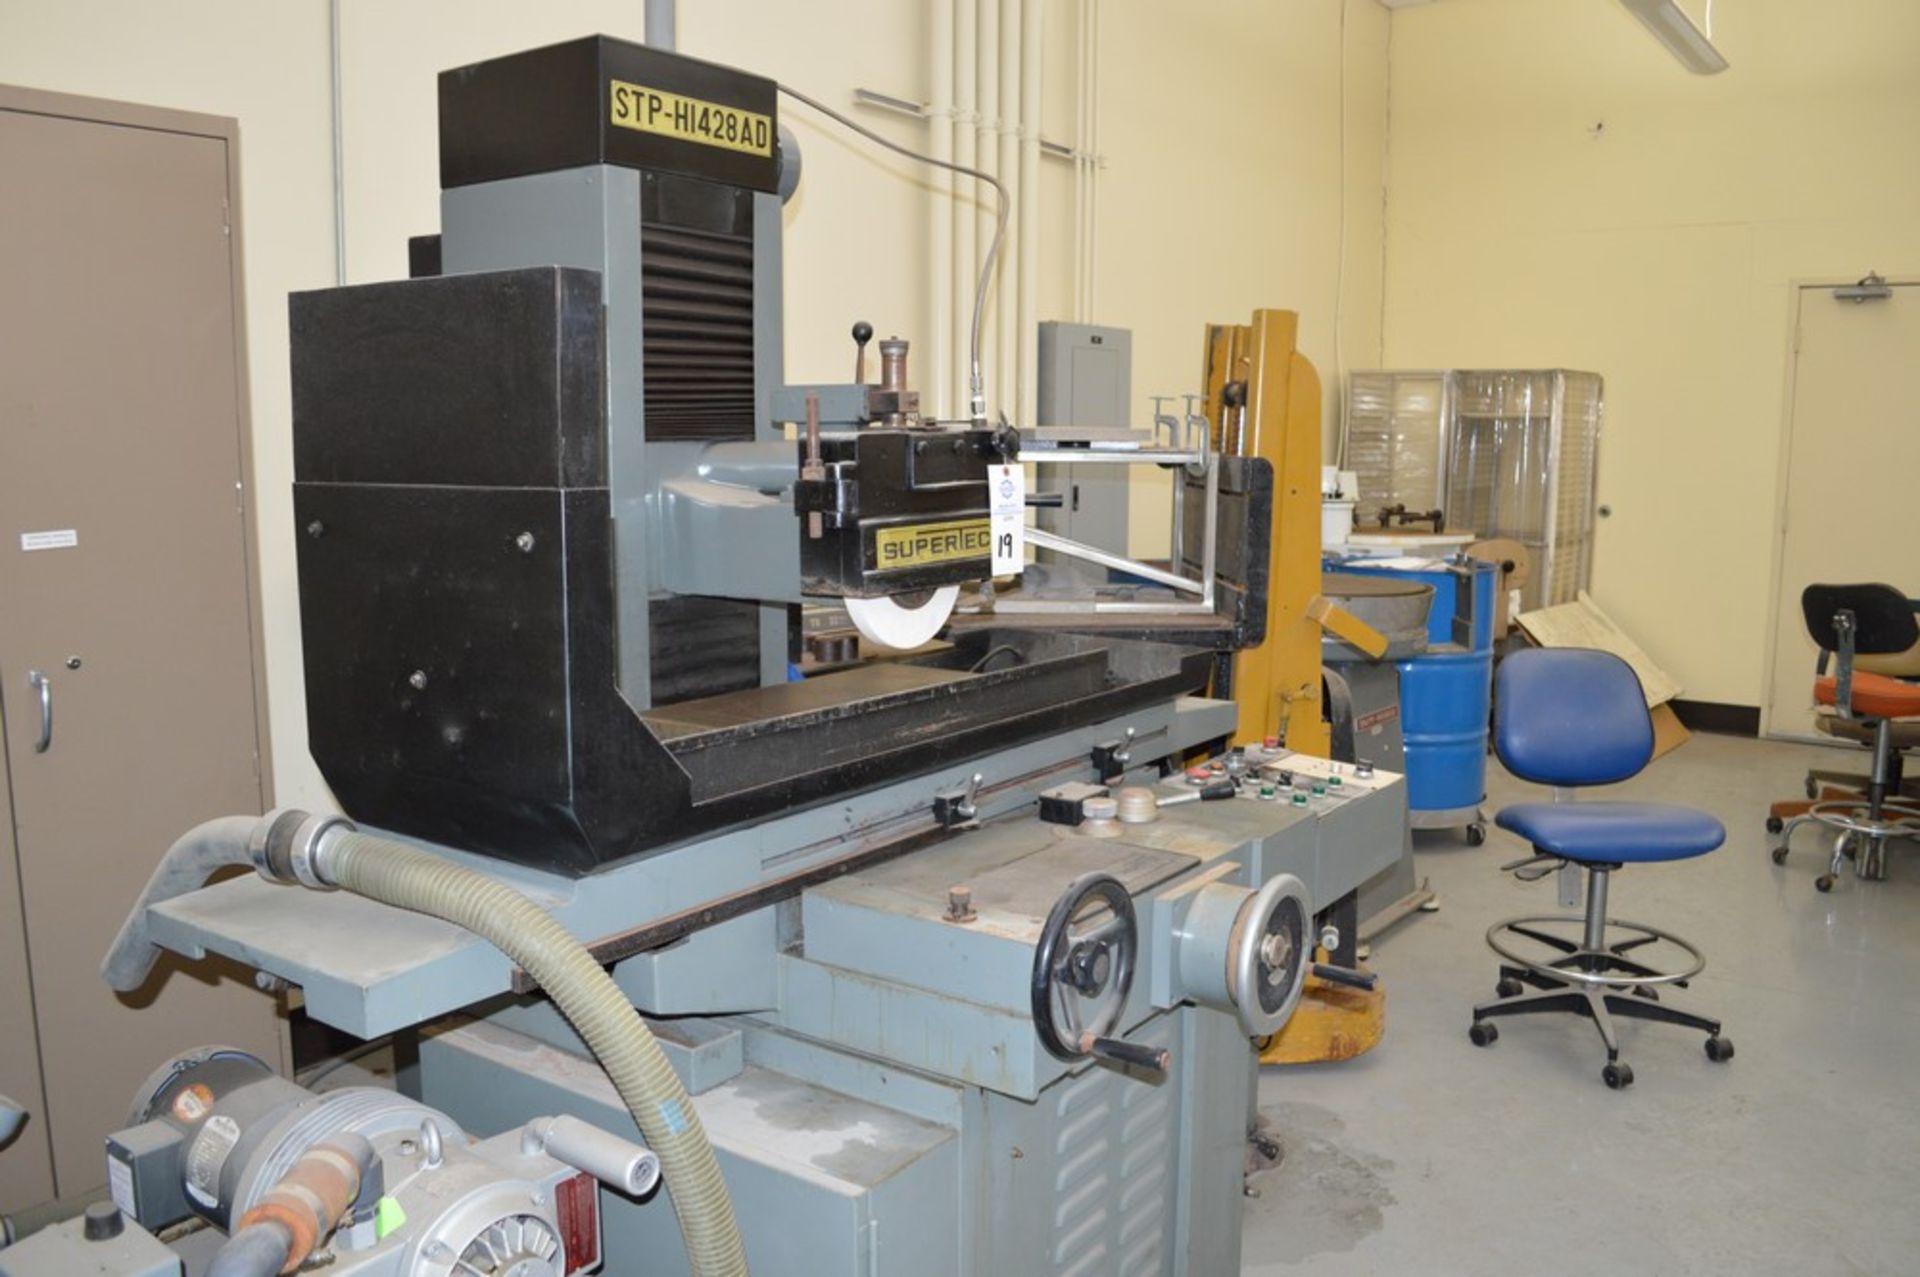 Supertec, STP-H1428 AD Grinder, Full three axis hydraulics, 12 x 27 magnetic chuck - Image 6 of 9